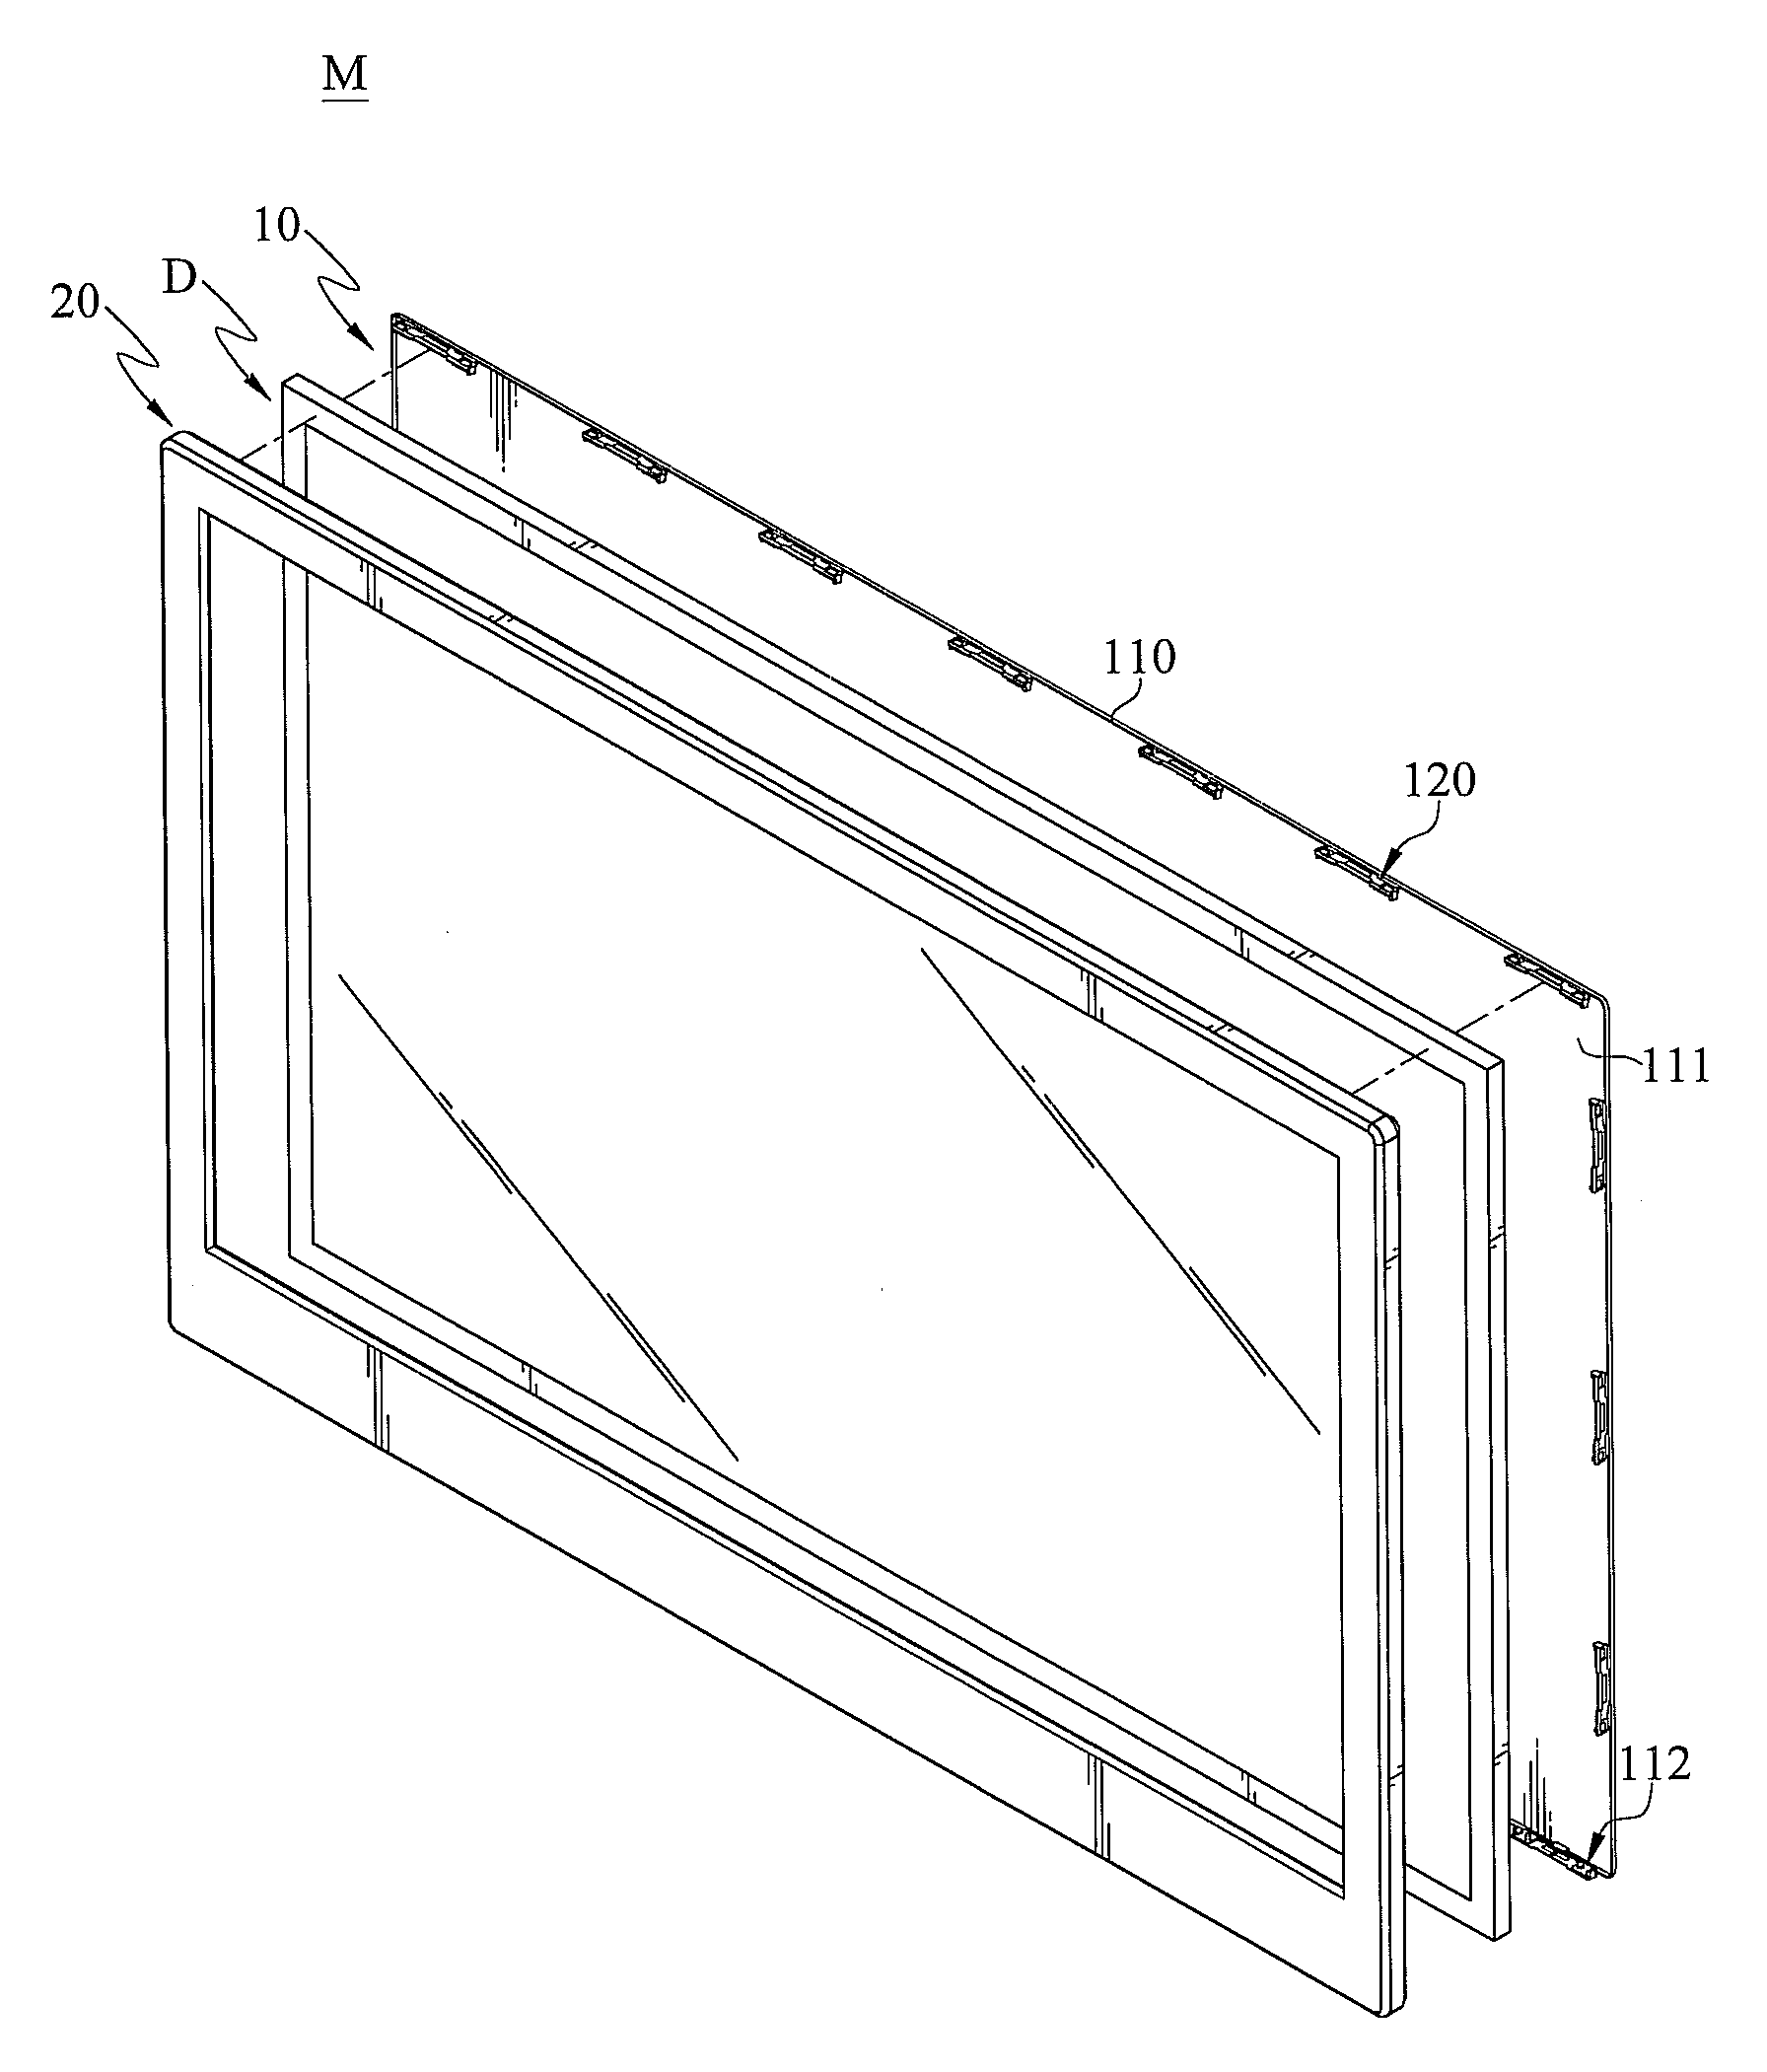 Display casing and cover structure thereof